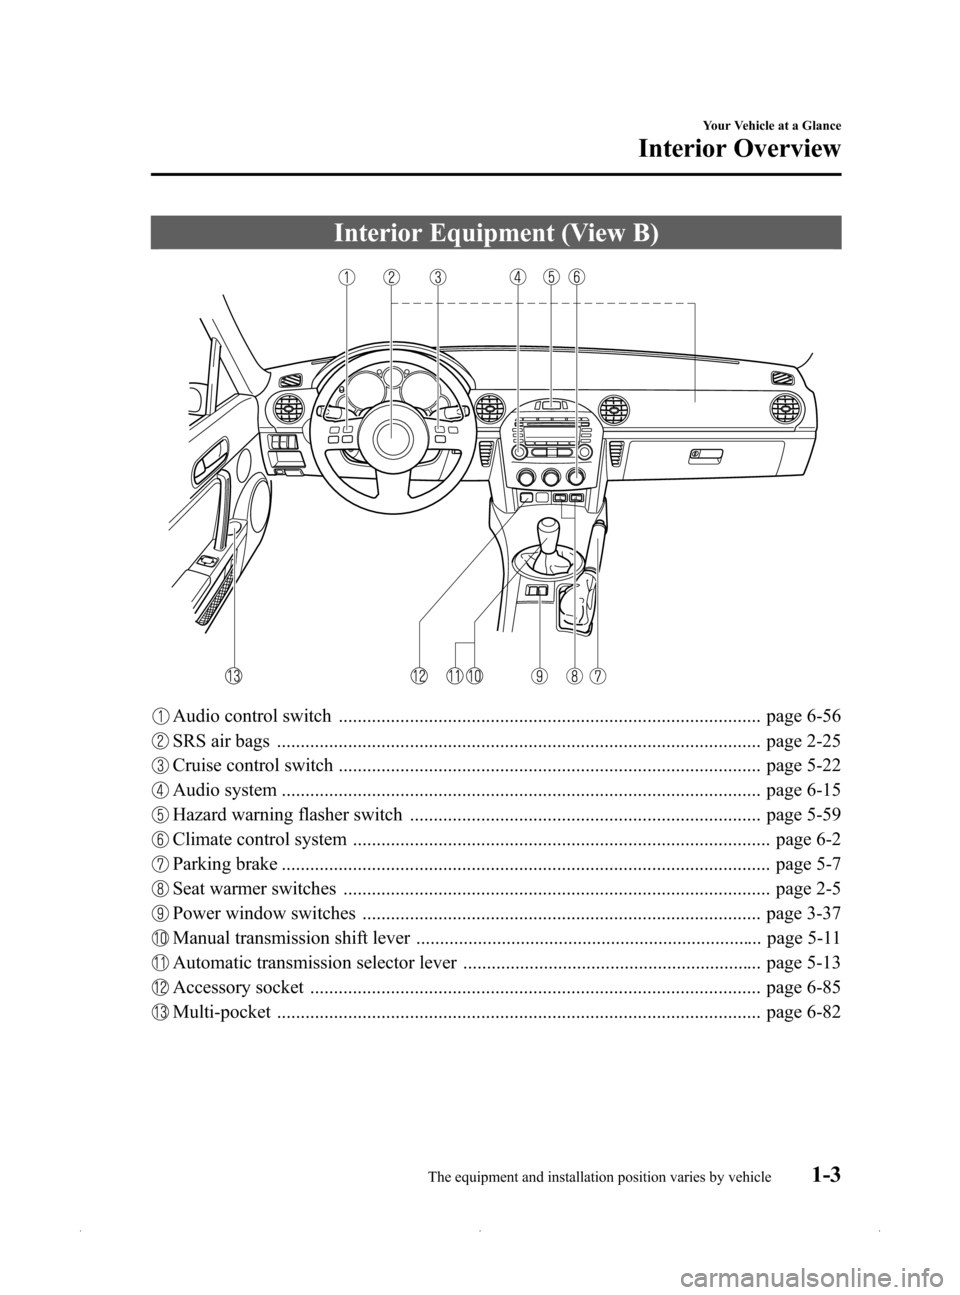 MAZDA MODEL MX-5 PRHT 2015  Owners Manual (in English) Black plate (9,1)
Interior Equipment (View B)
Audio control switch ......................................................................................... page 6-56
SRS air bags ....................